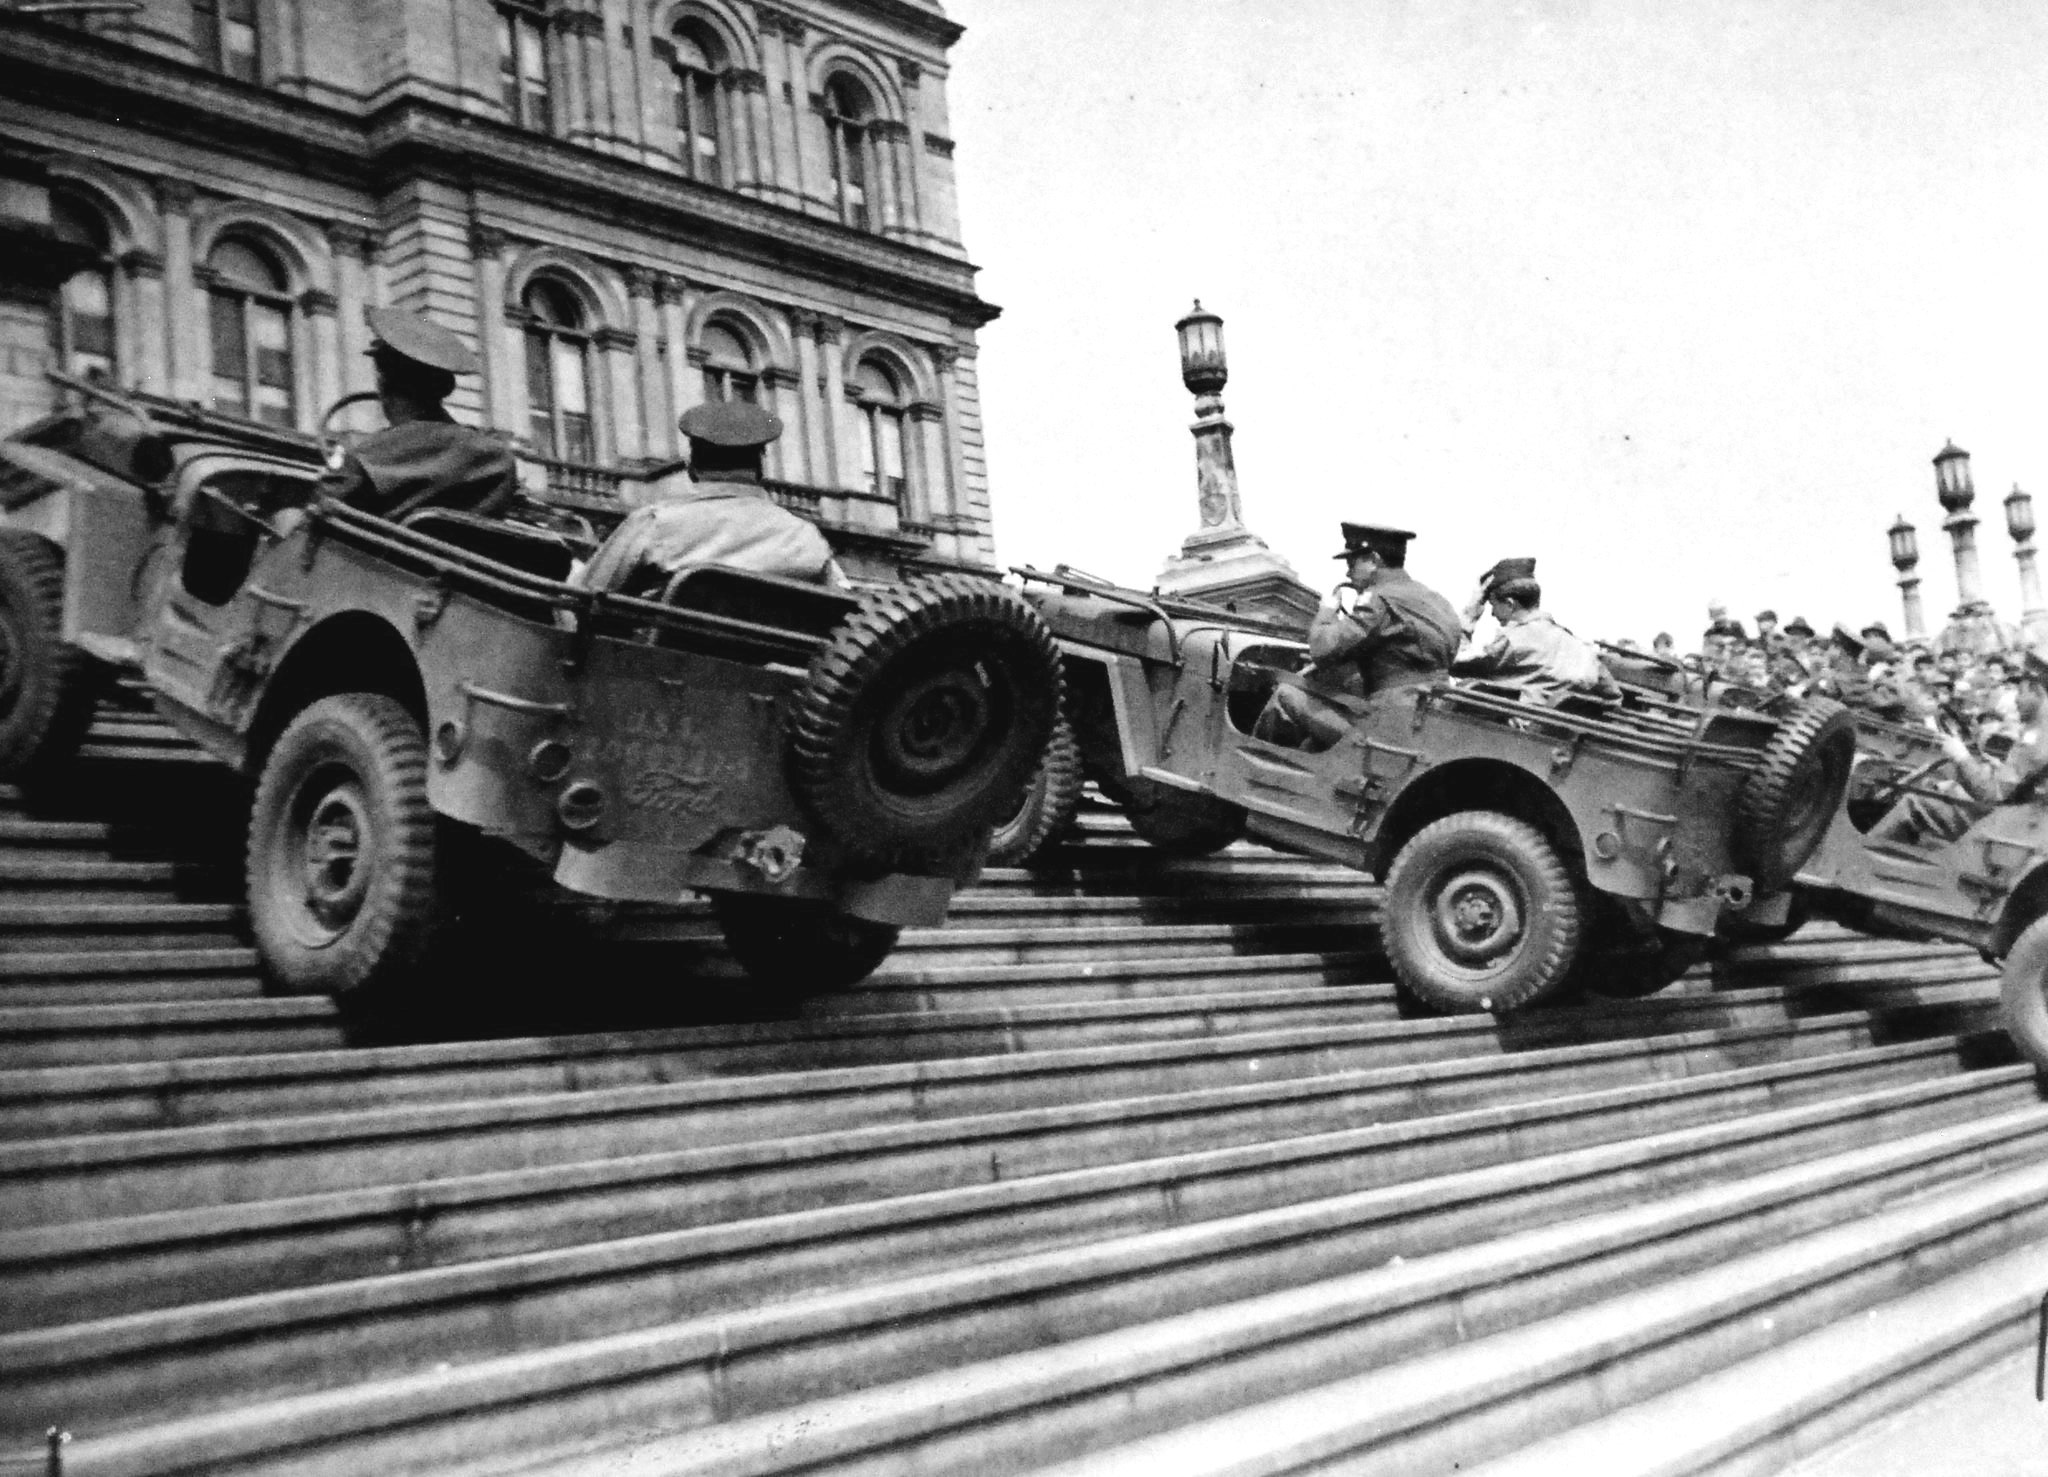 In a public relations event, three Jeeps climb the steps of the State Capitol building, Albany, New York, United States, 15 Apr 1942.